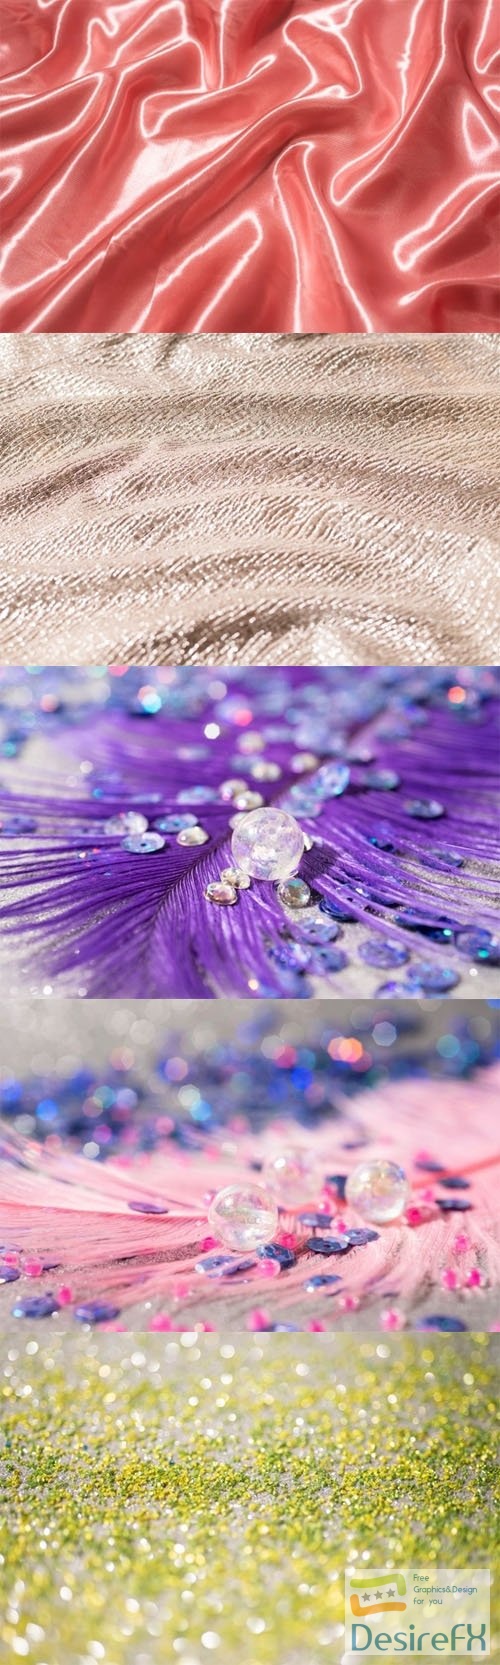 15 Awesome Sparks and Glitters Photos Collection